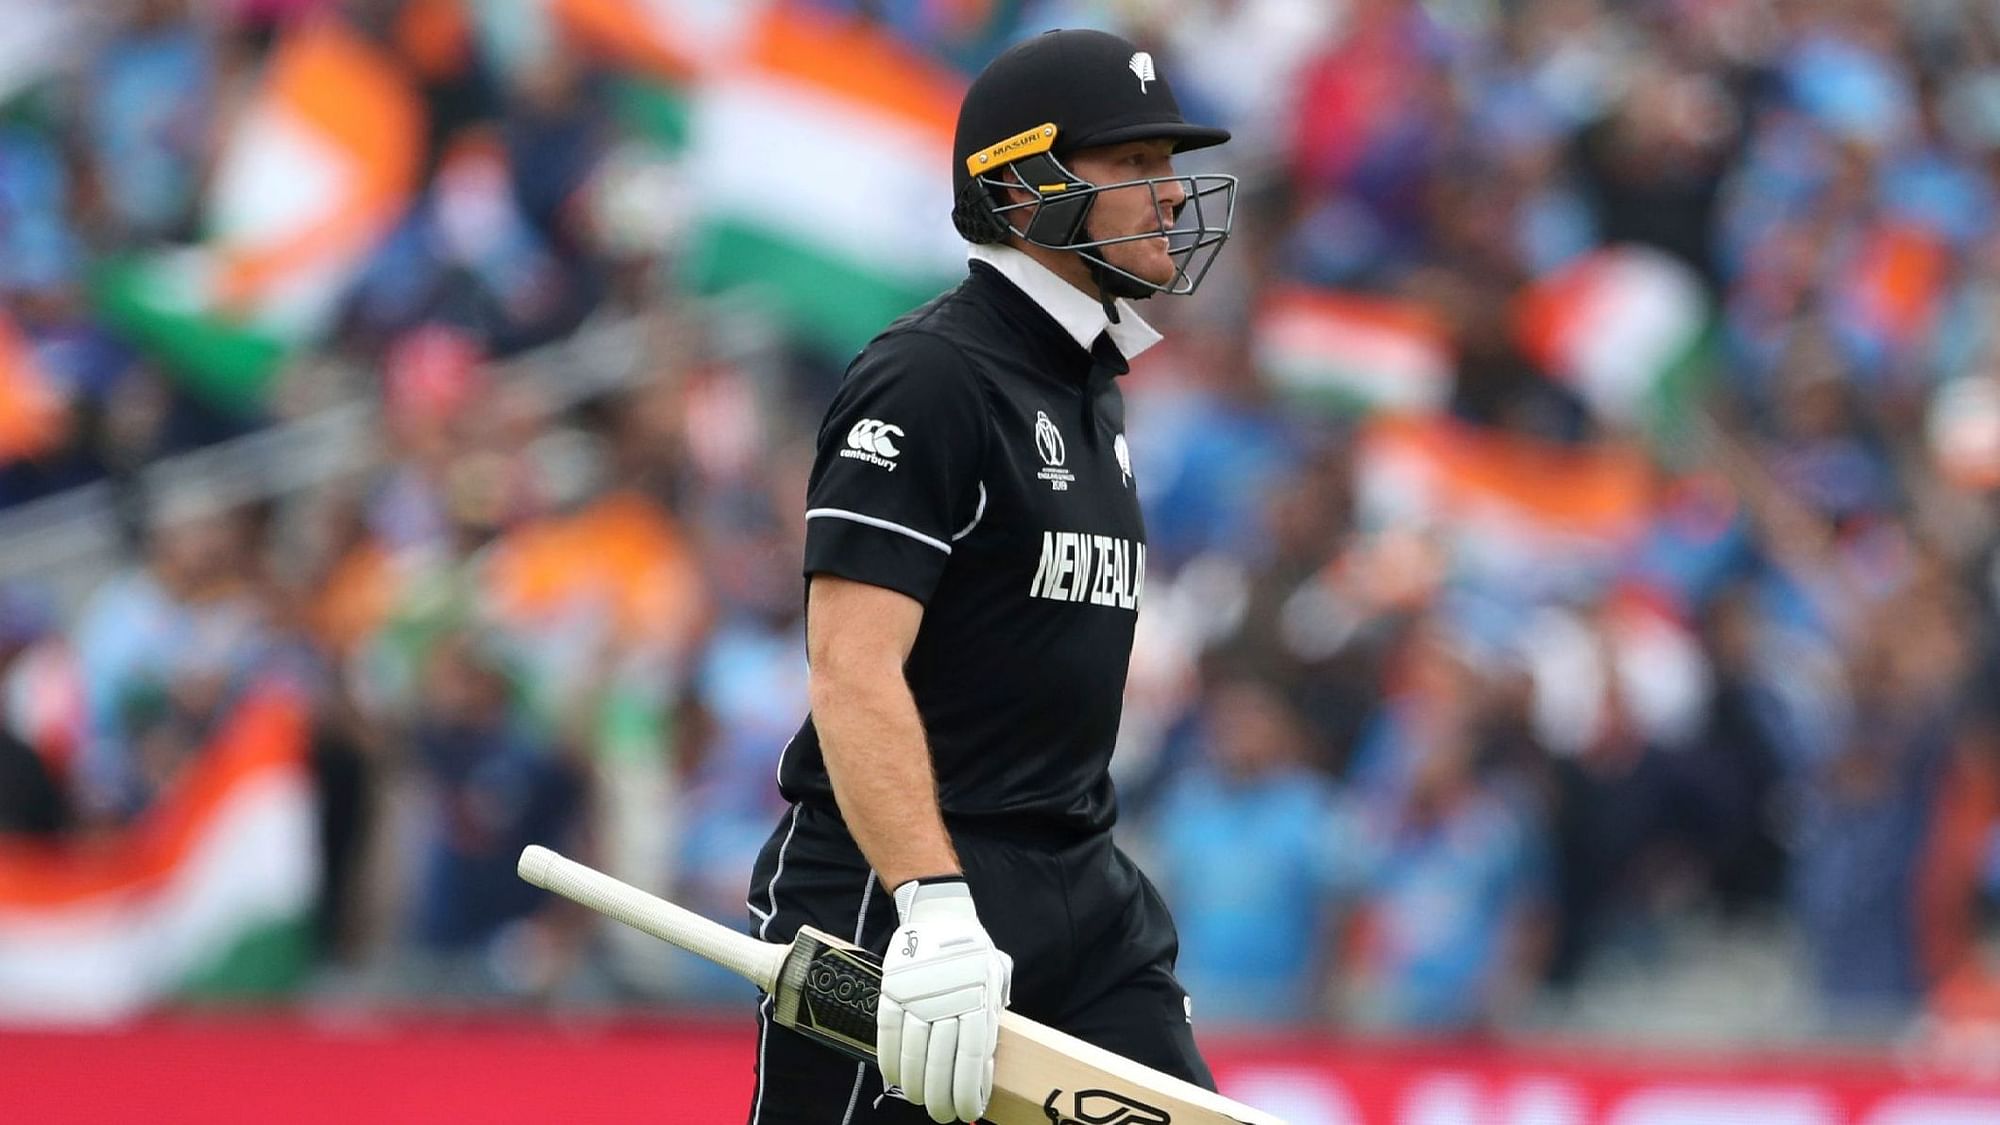 New Zealand’s Martin Guptill leaves the field after being dismissed by India’s Jasprit Bumrah during the Cricket World Cup semi-final match between India and New Zealand.